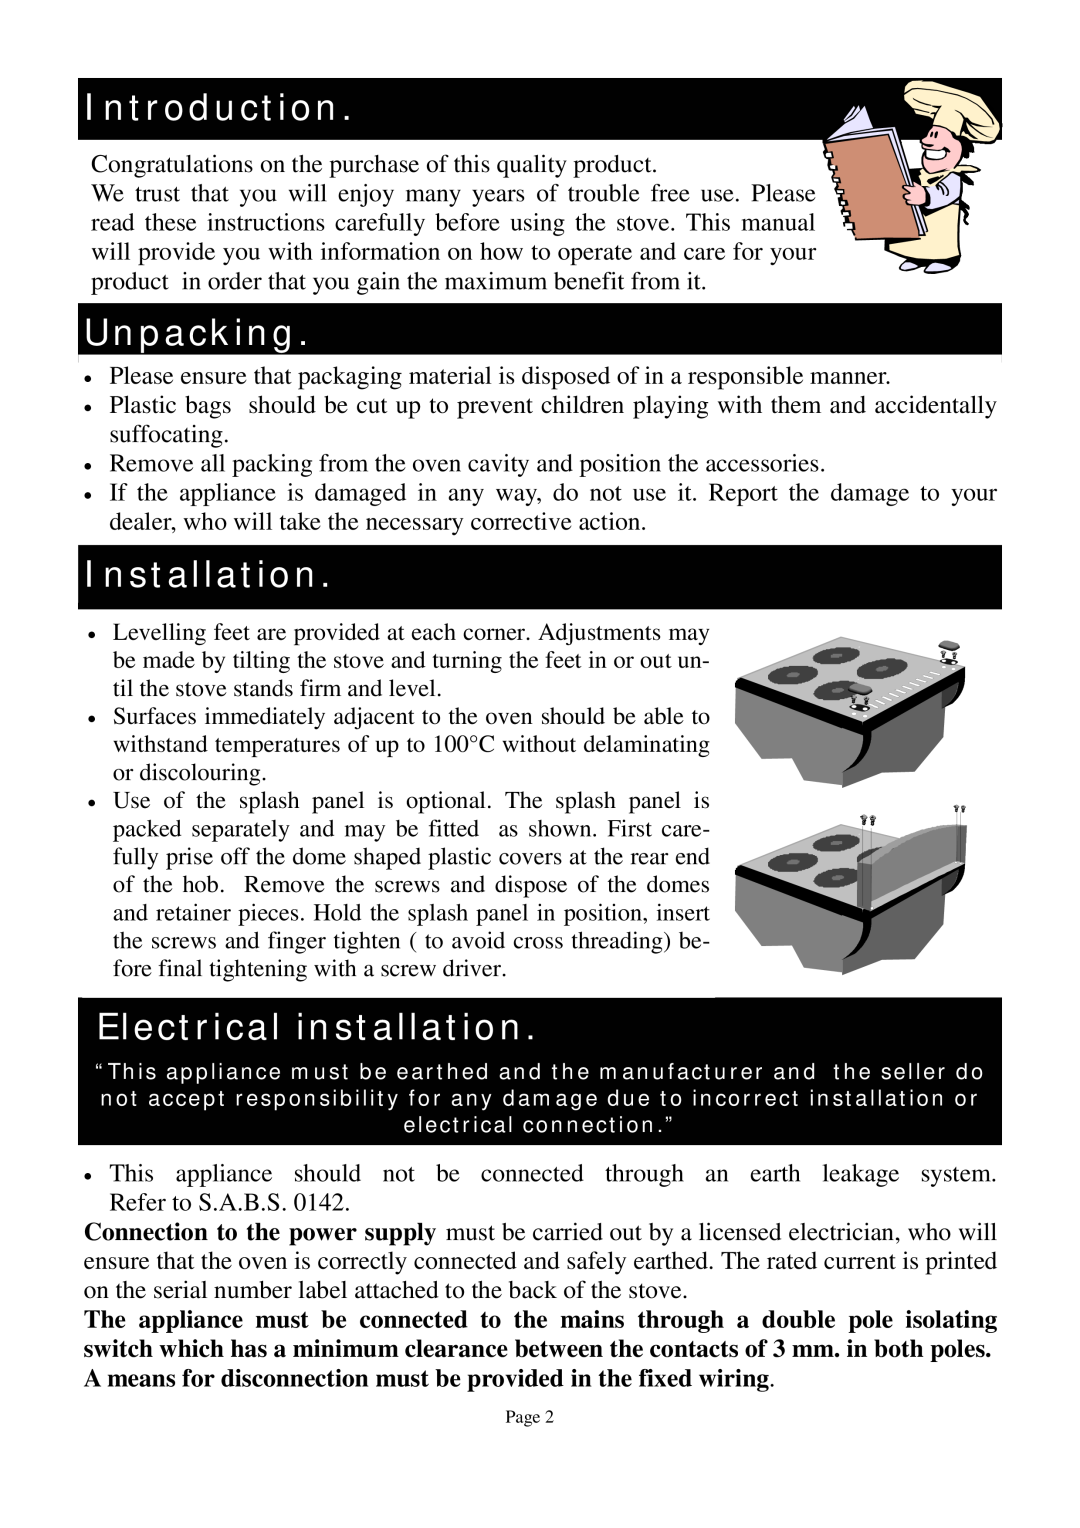 Defy Appliances SBW owner manual Introduction, Unpacking, Electrical installation 